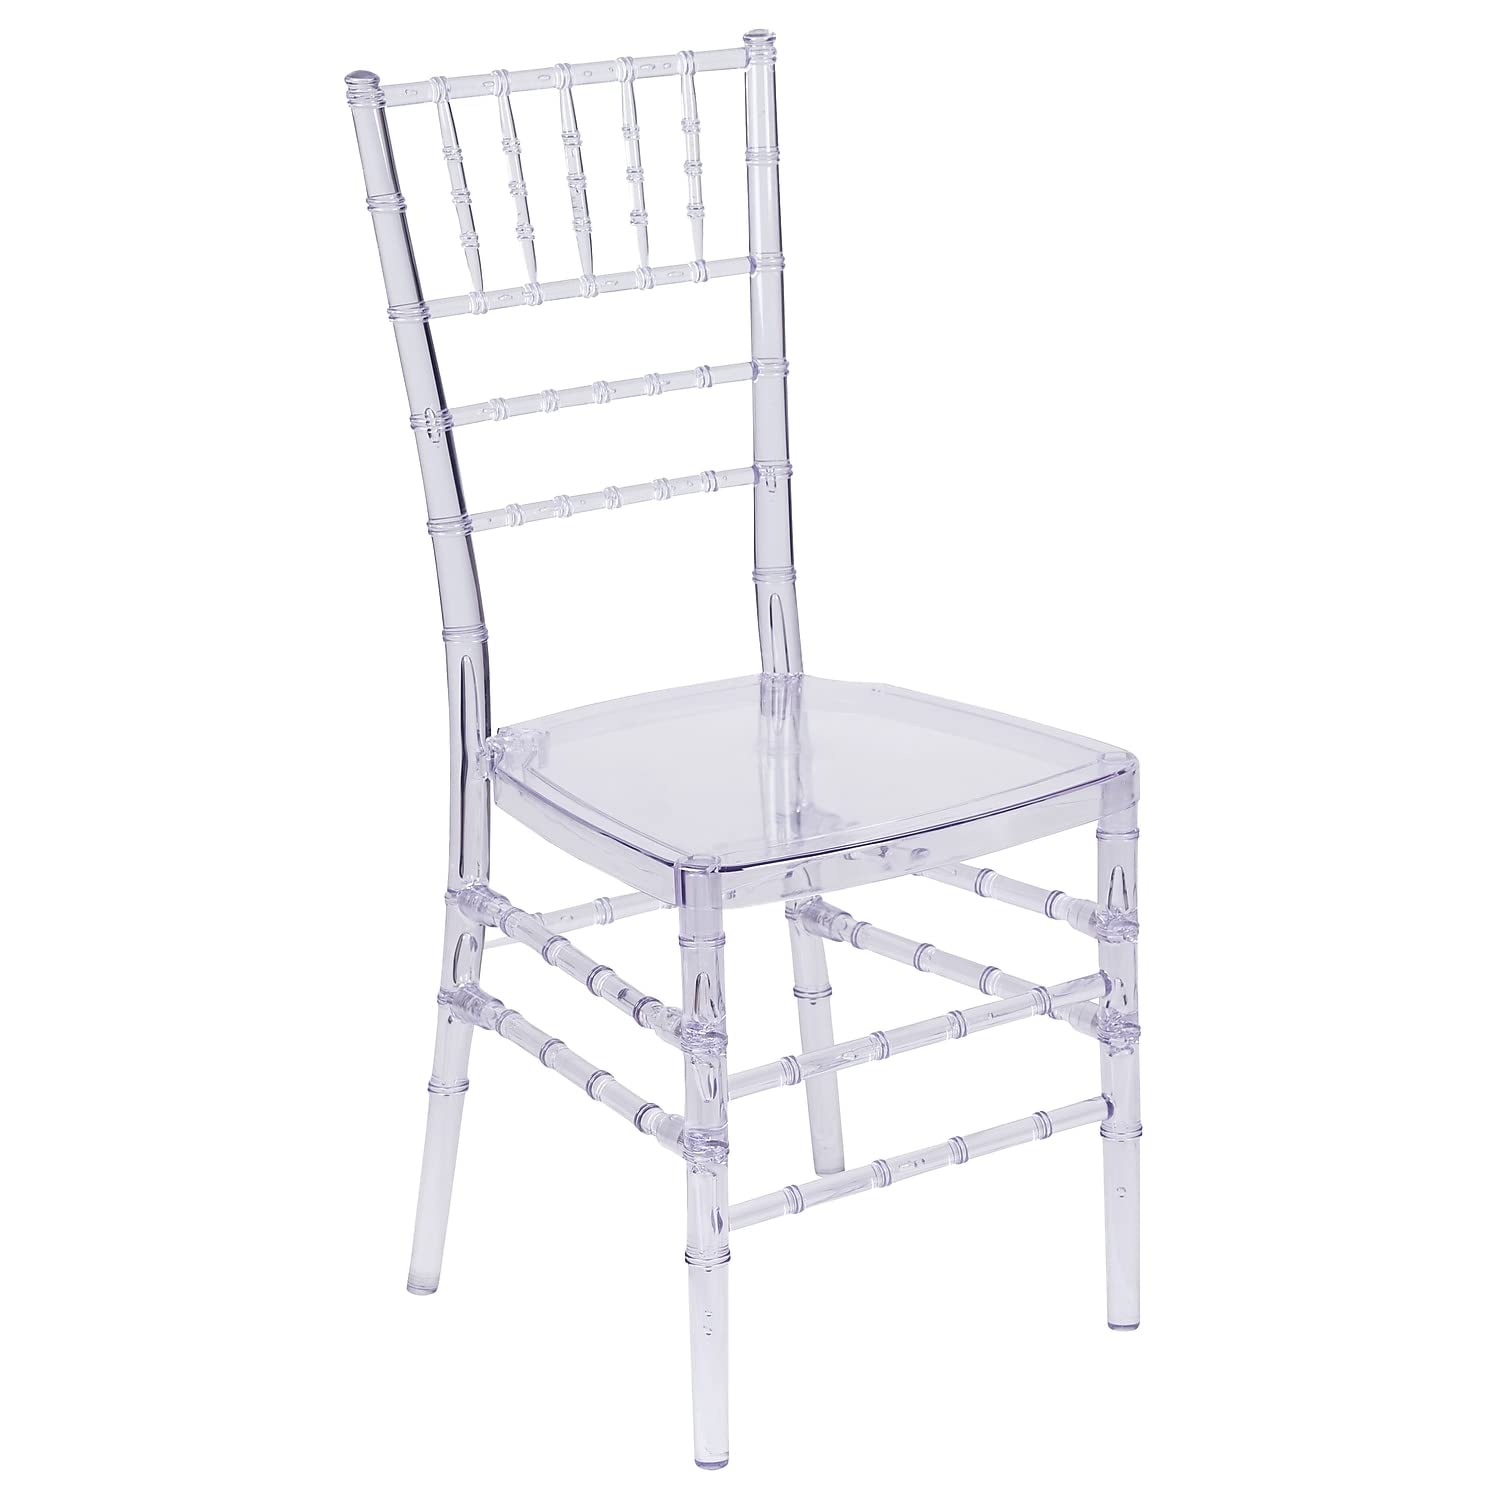 Chiavari Party chairs for rent in woodland hills , Los Angeles area